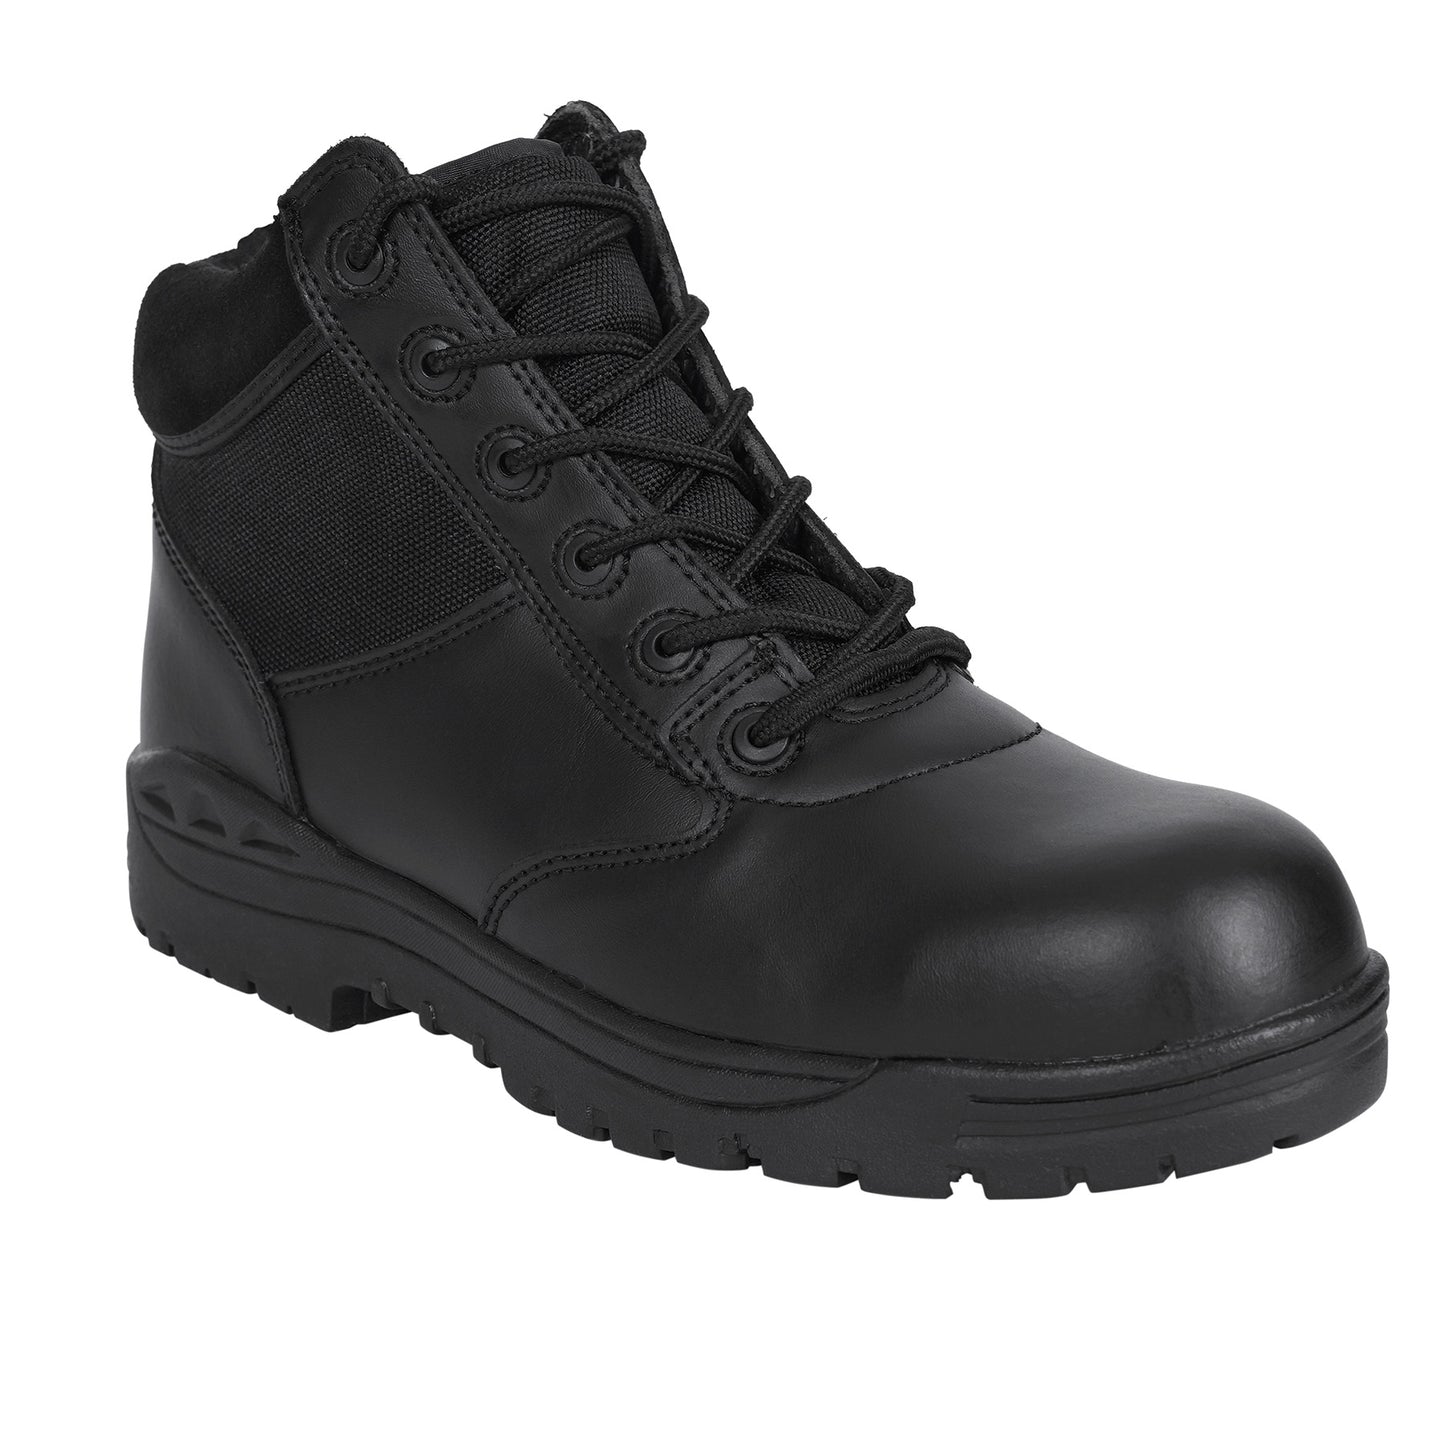 Forced Entry Composite Toe Tactical Boots - 6 Inch